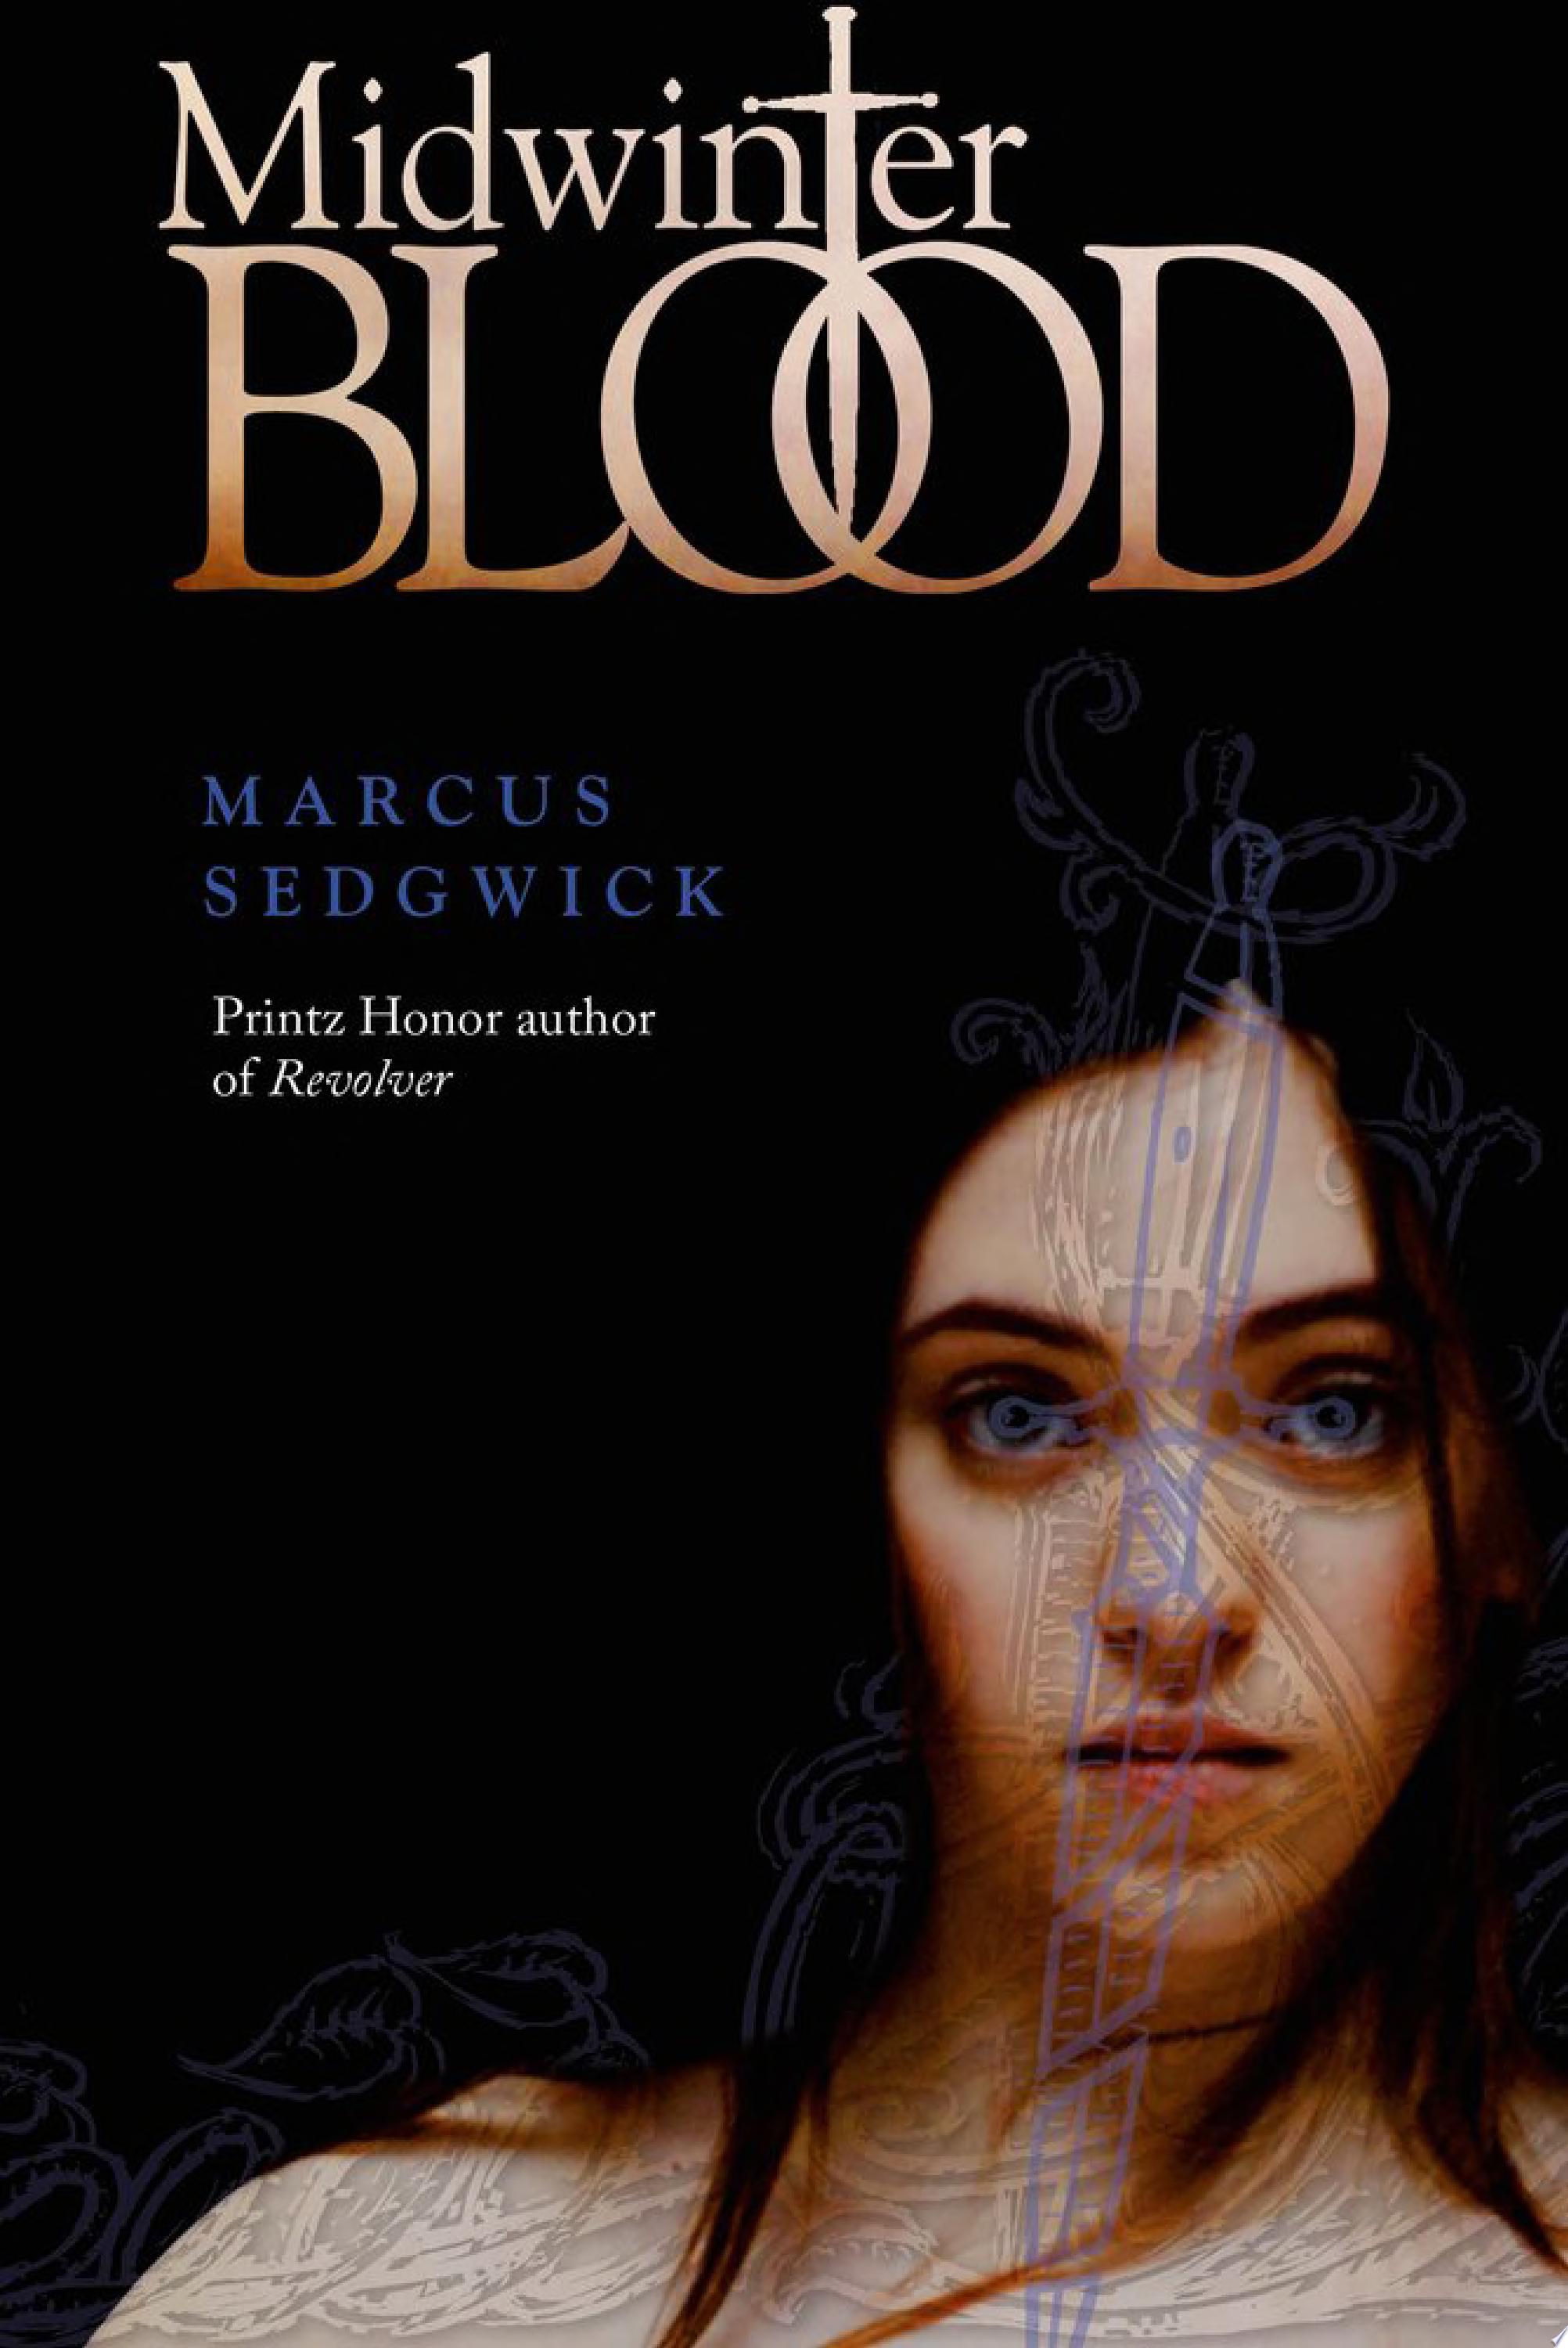 Image for "Midwinterblood"